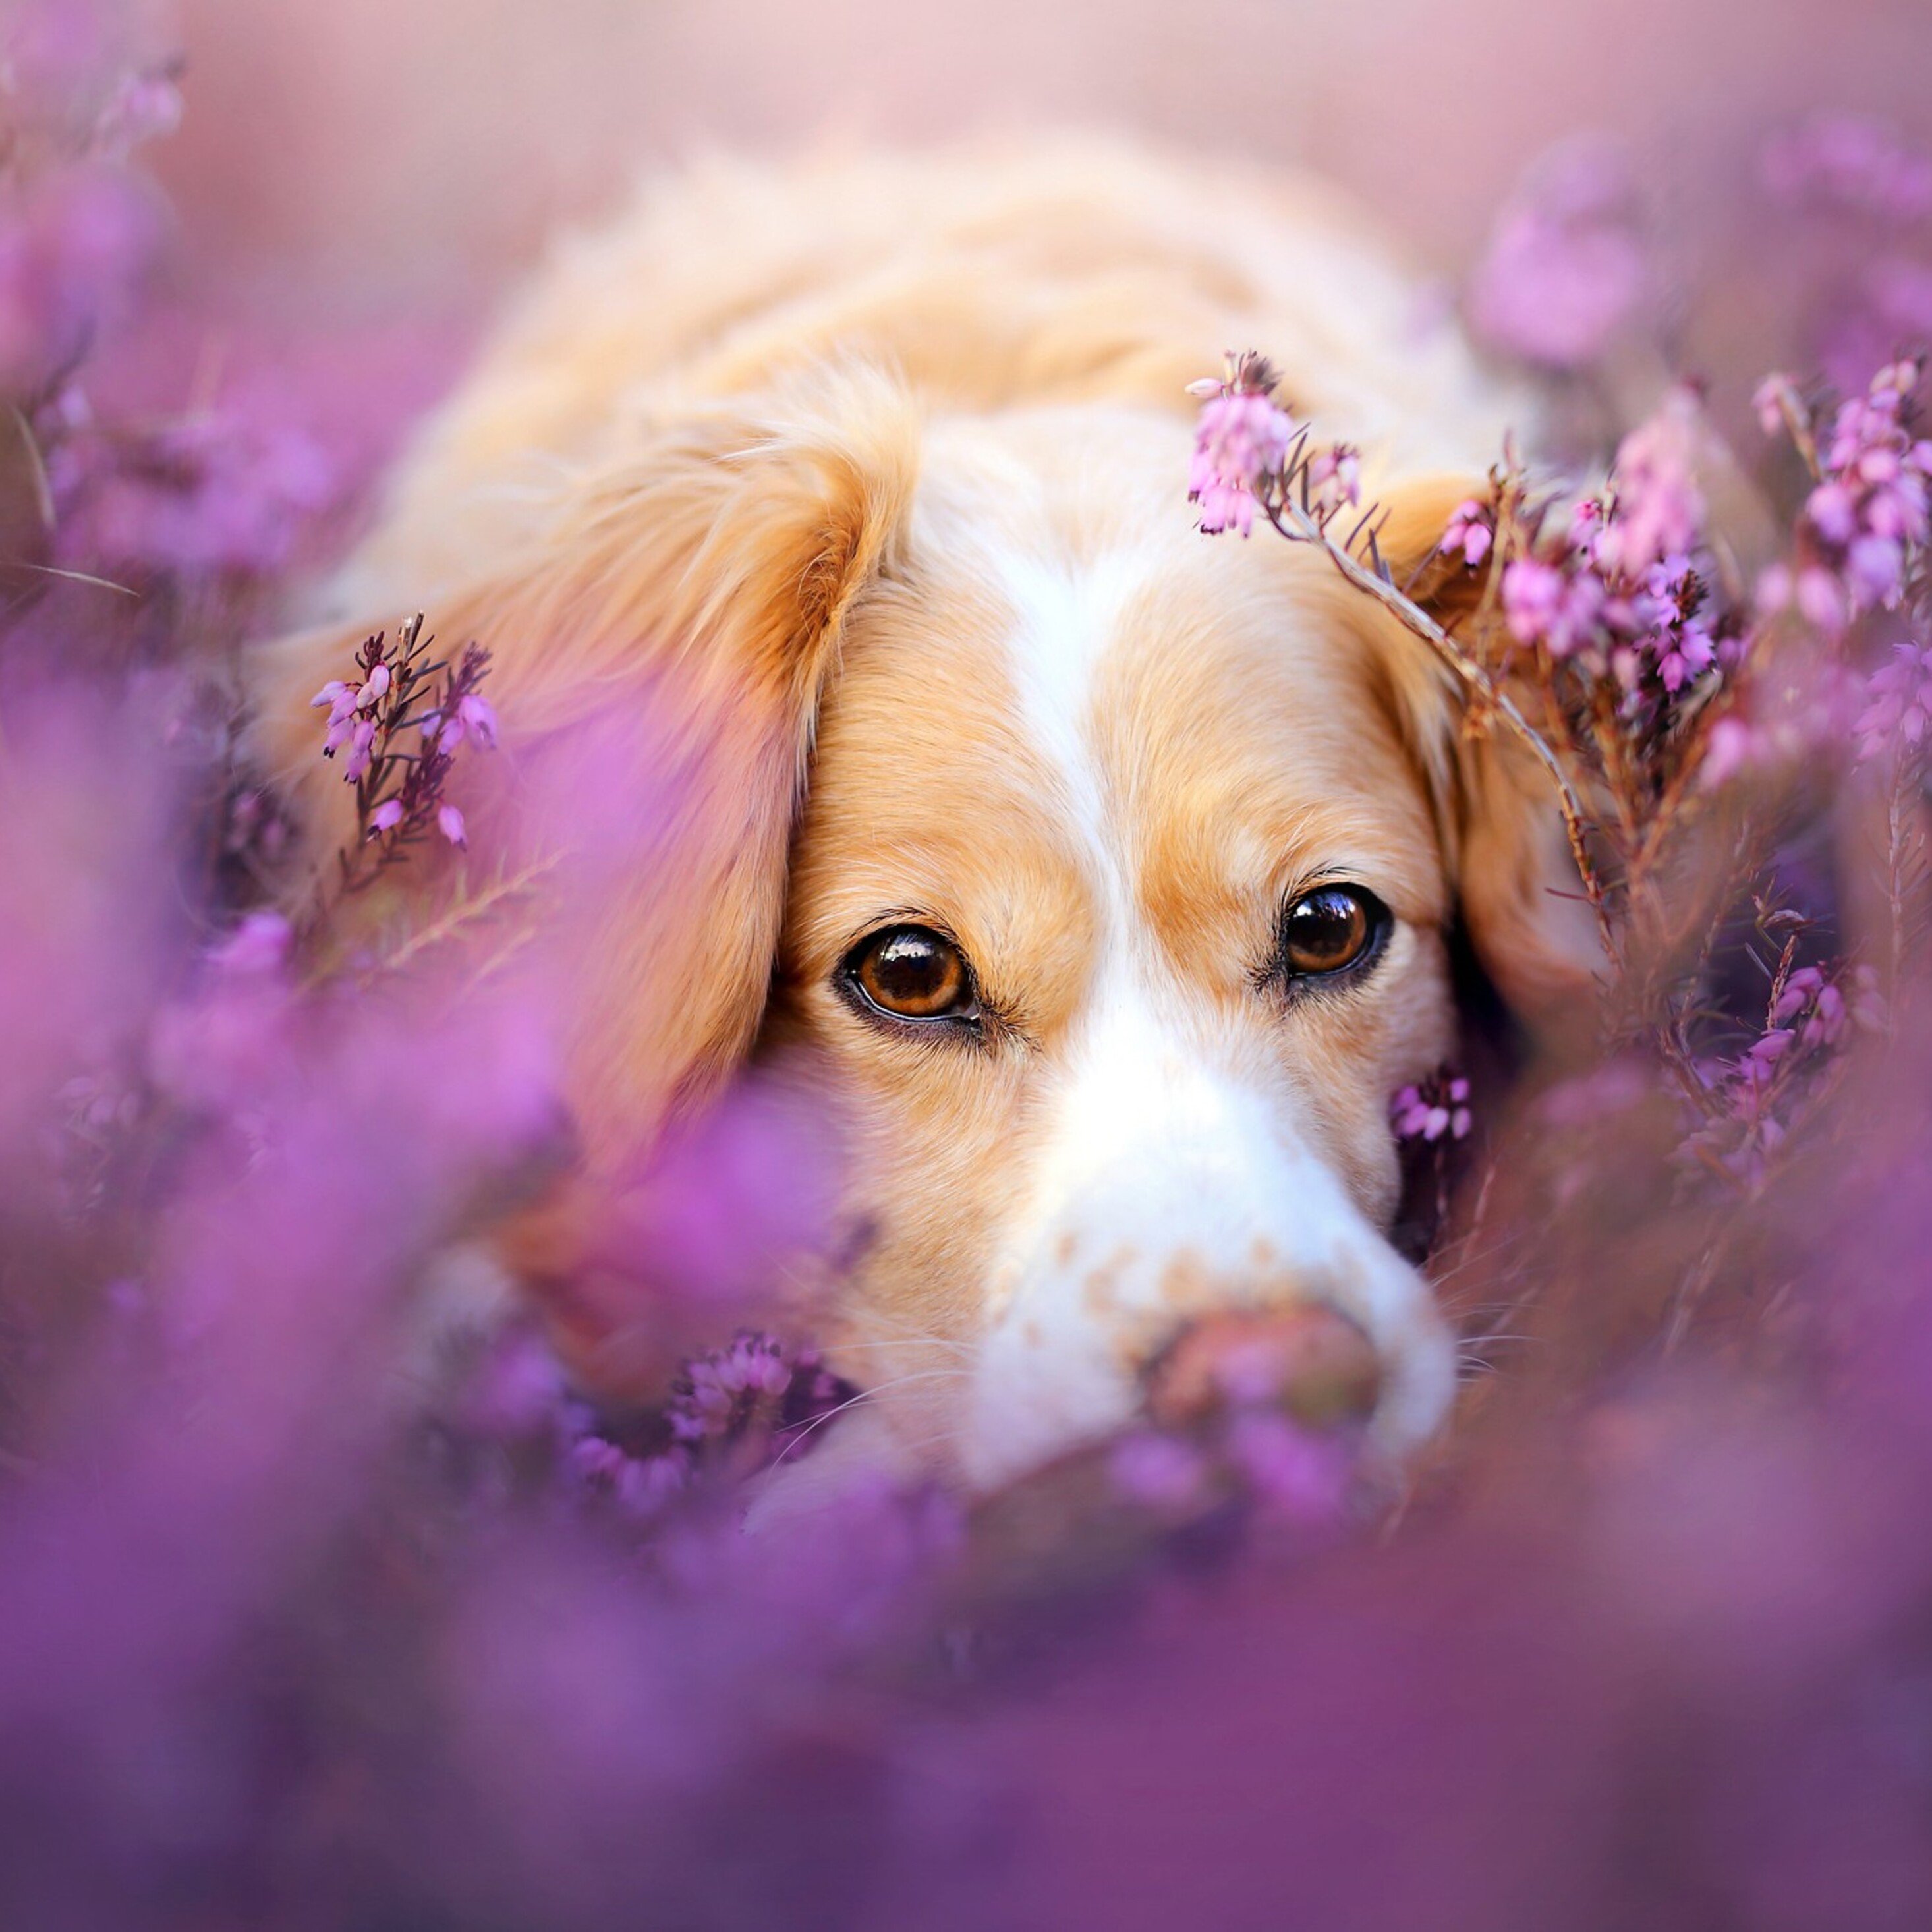 Cute Dog In Flowers iPad Pro Retina Display HD 4k Wallpaper, Image, Background, Photo and Picture